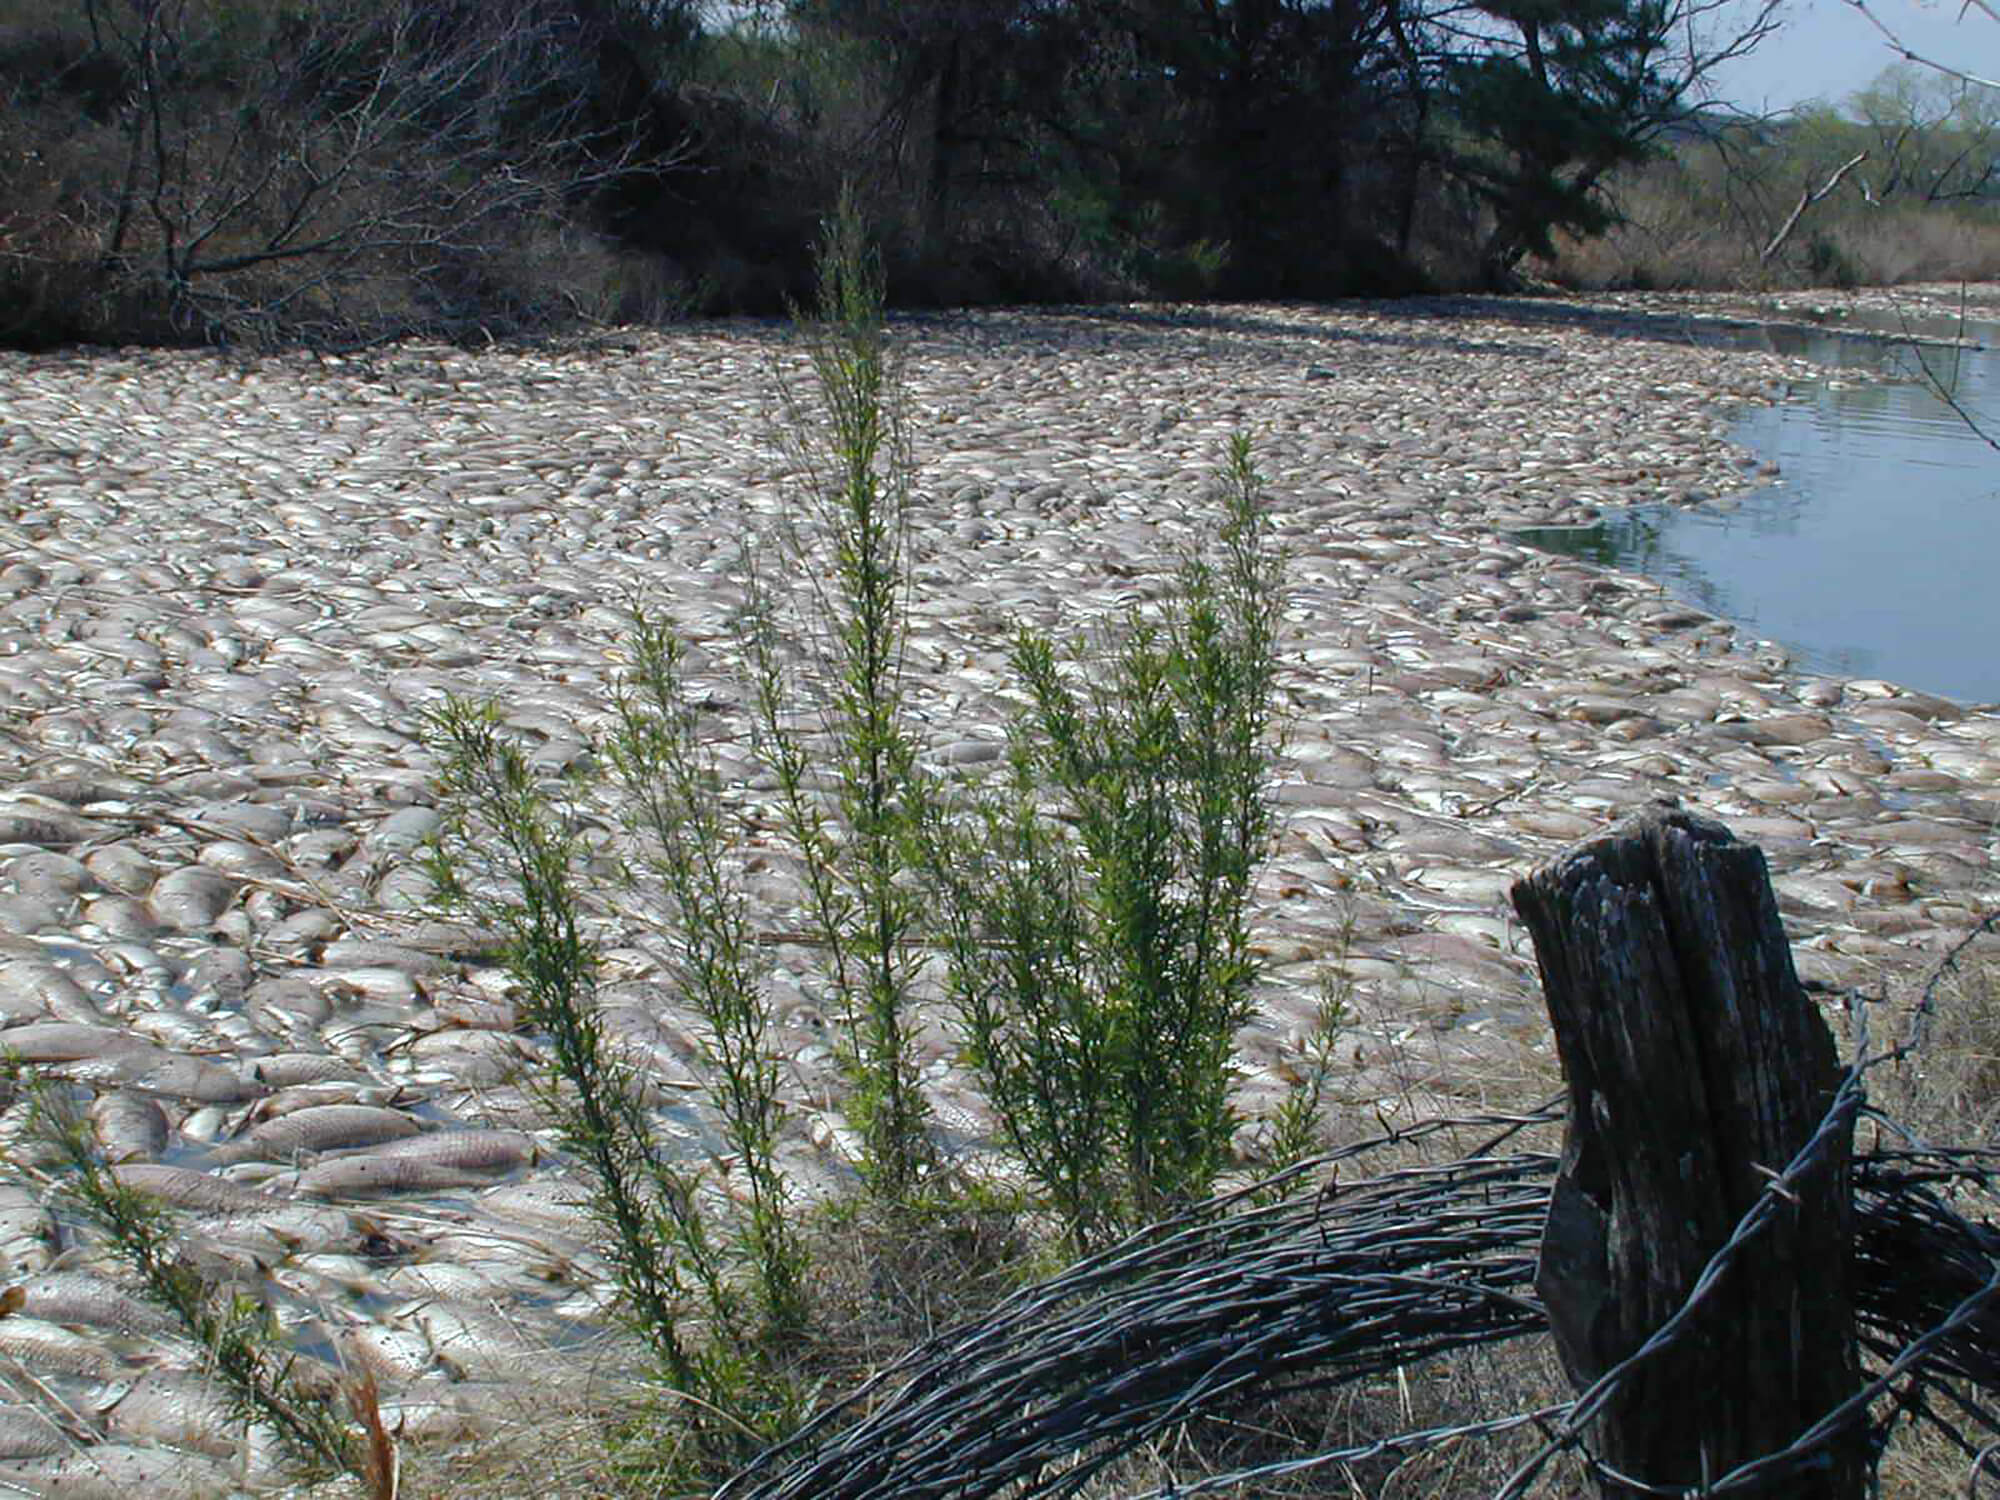 A toxic algae bloom led to more than 5 million fish killed at Lake Granby in Texas in 2003. Purdue University’s Jennifer Wisecaver’s work will identify the genetic mechanisms associated with toxicity to better predict these deadly events. (Photo courtesy Gary Turner/Brazos River Authority)